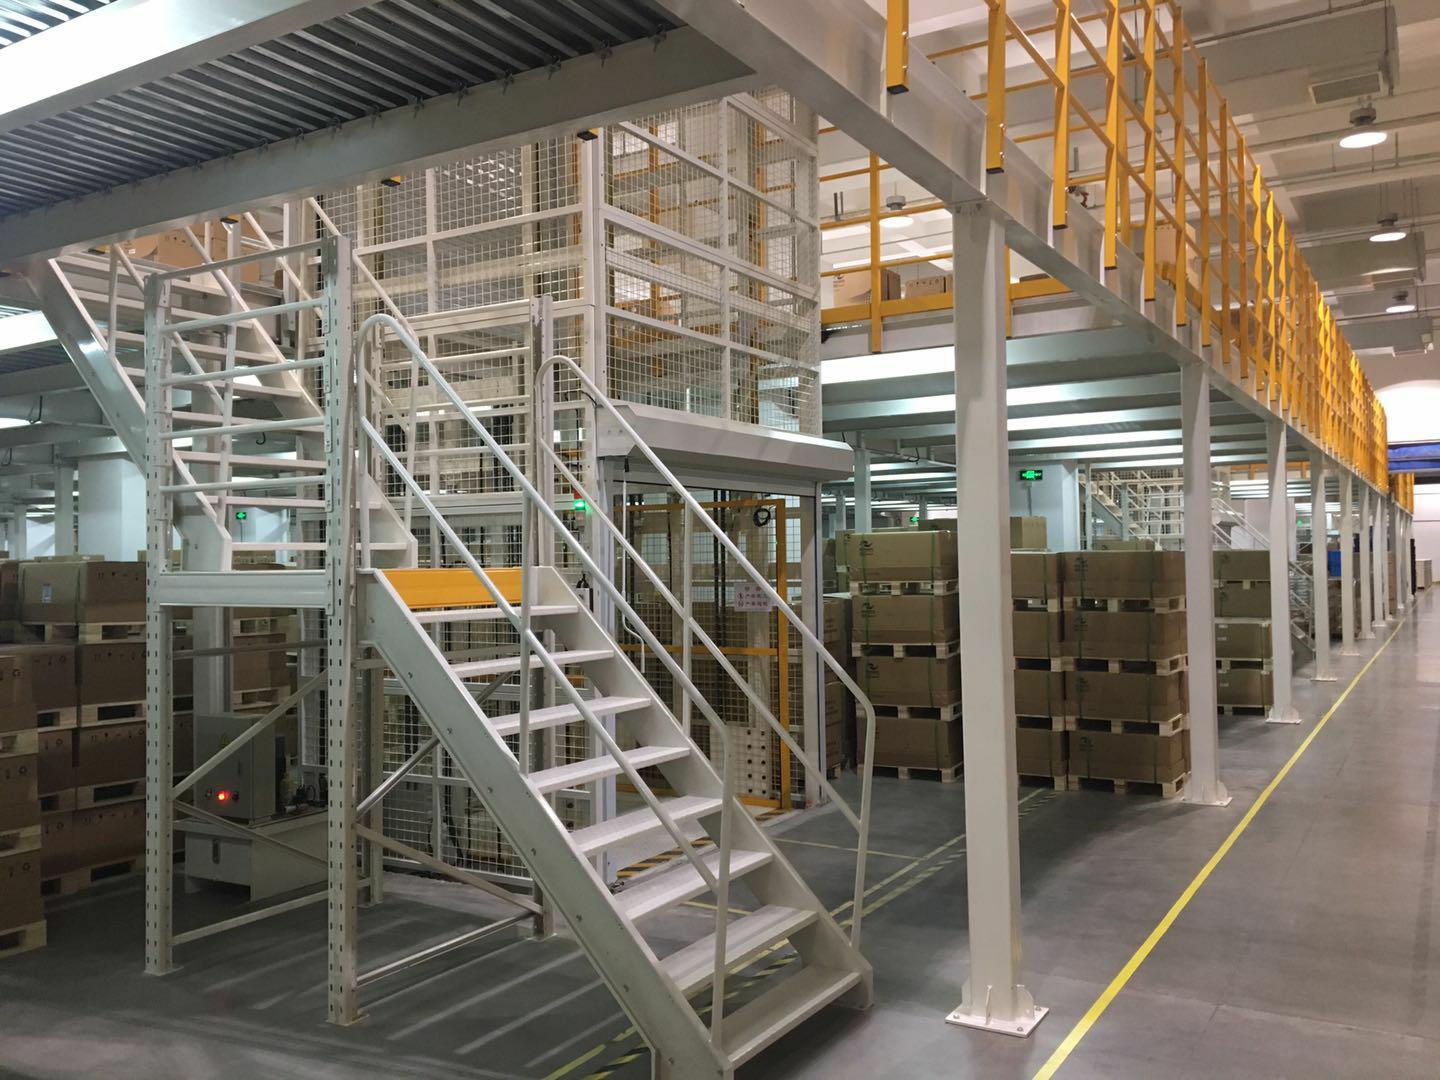 Why are more and more customers choosing steel platform racking?